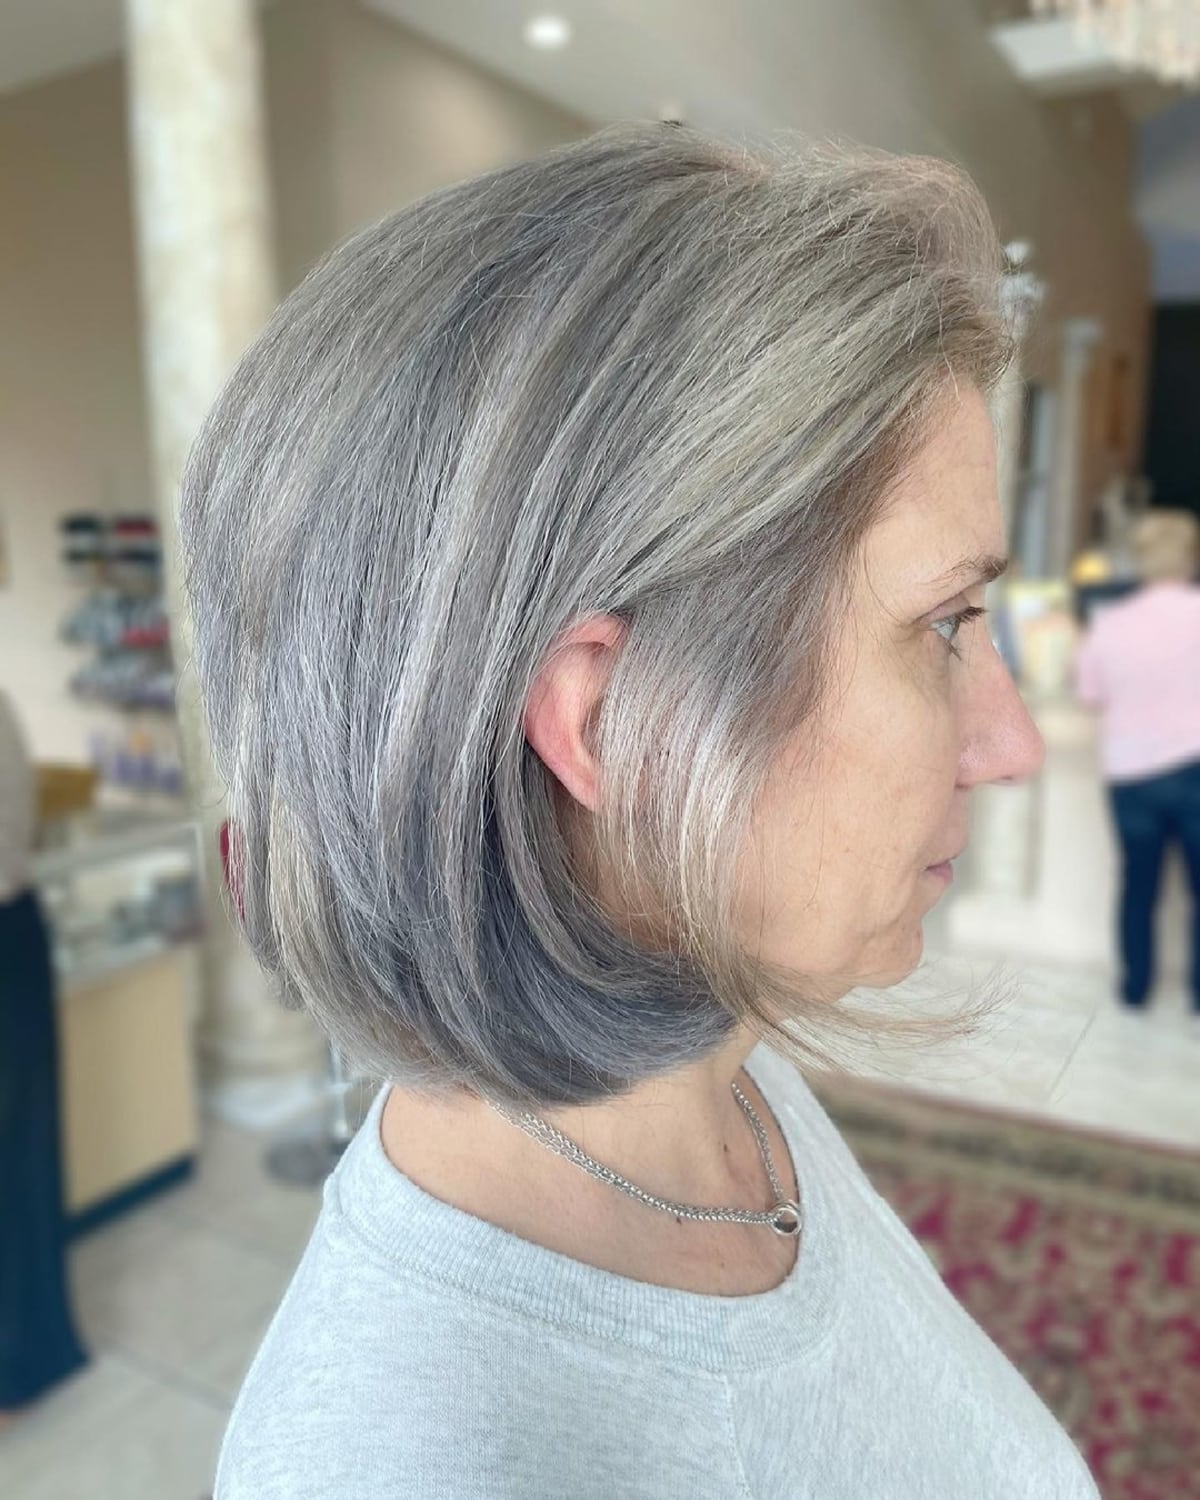 24 Edgy Hairstyles for Women Over 60 Who Want a Young &#038; Mod Look